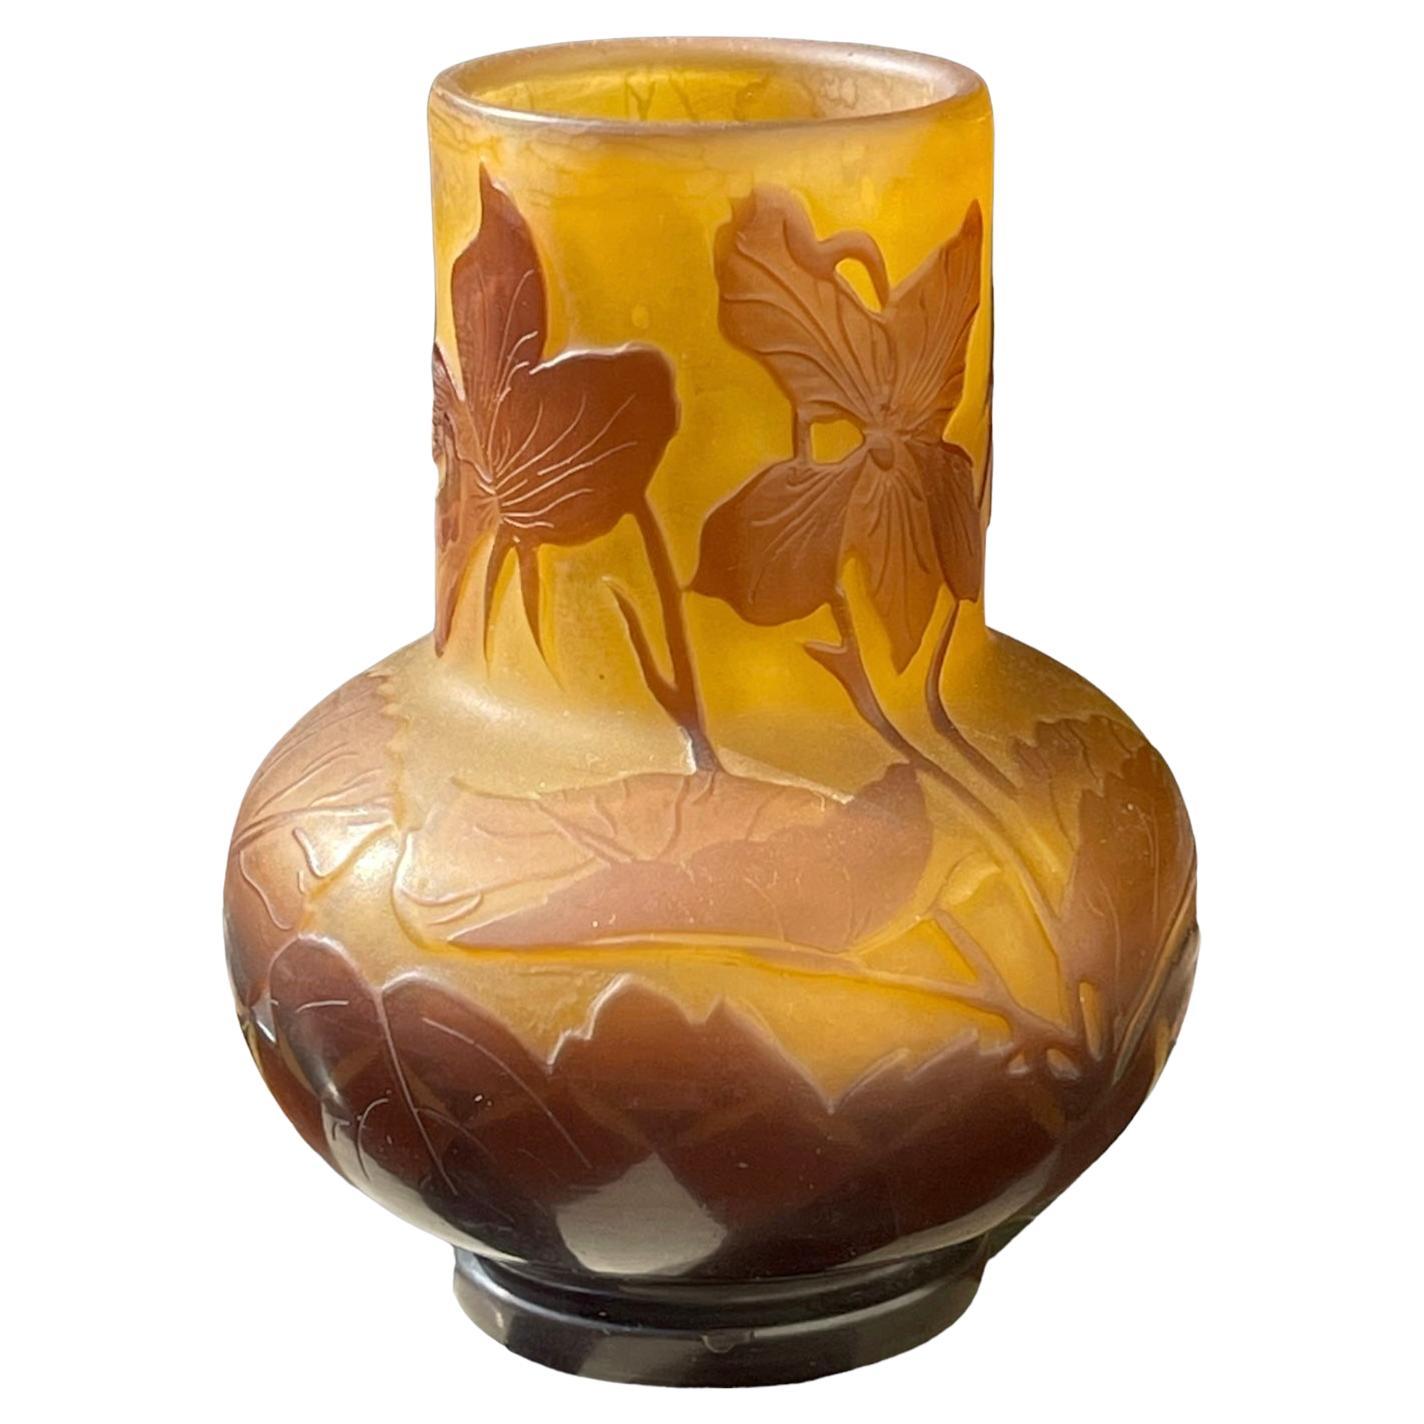 Émile GALLE - Small Vase With Floral Decor For Sale